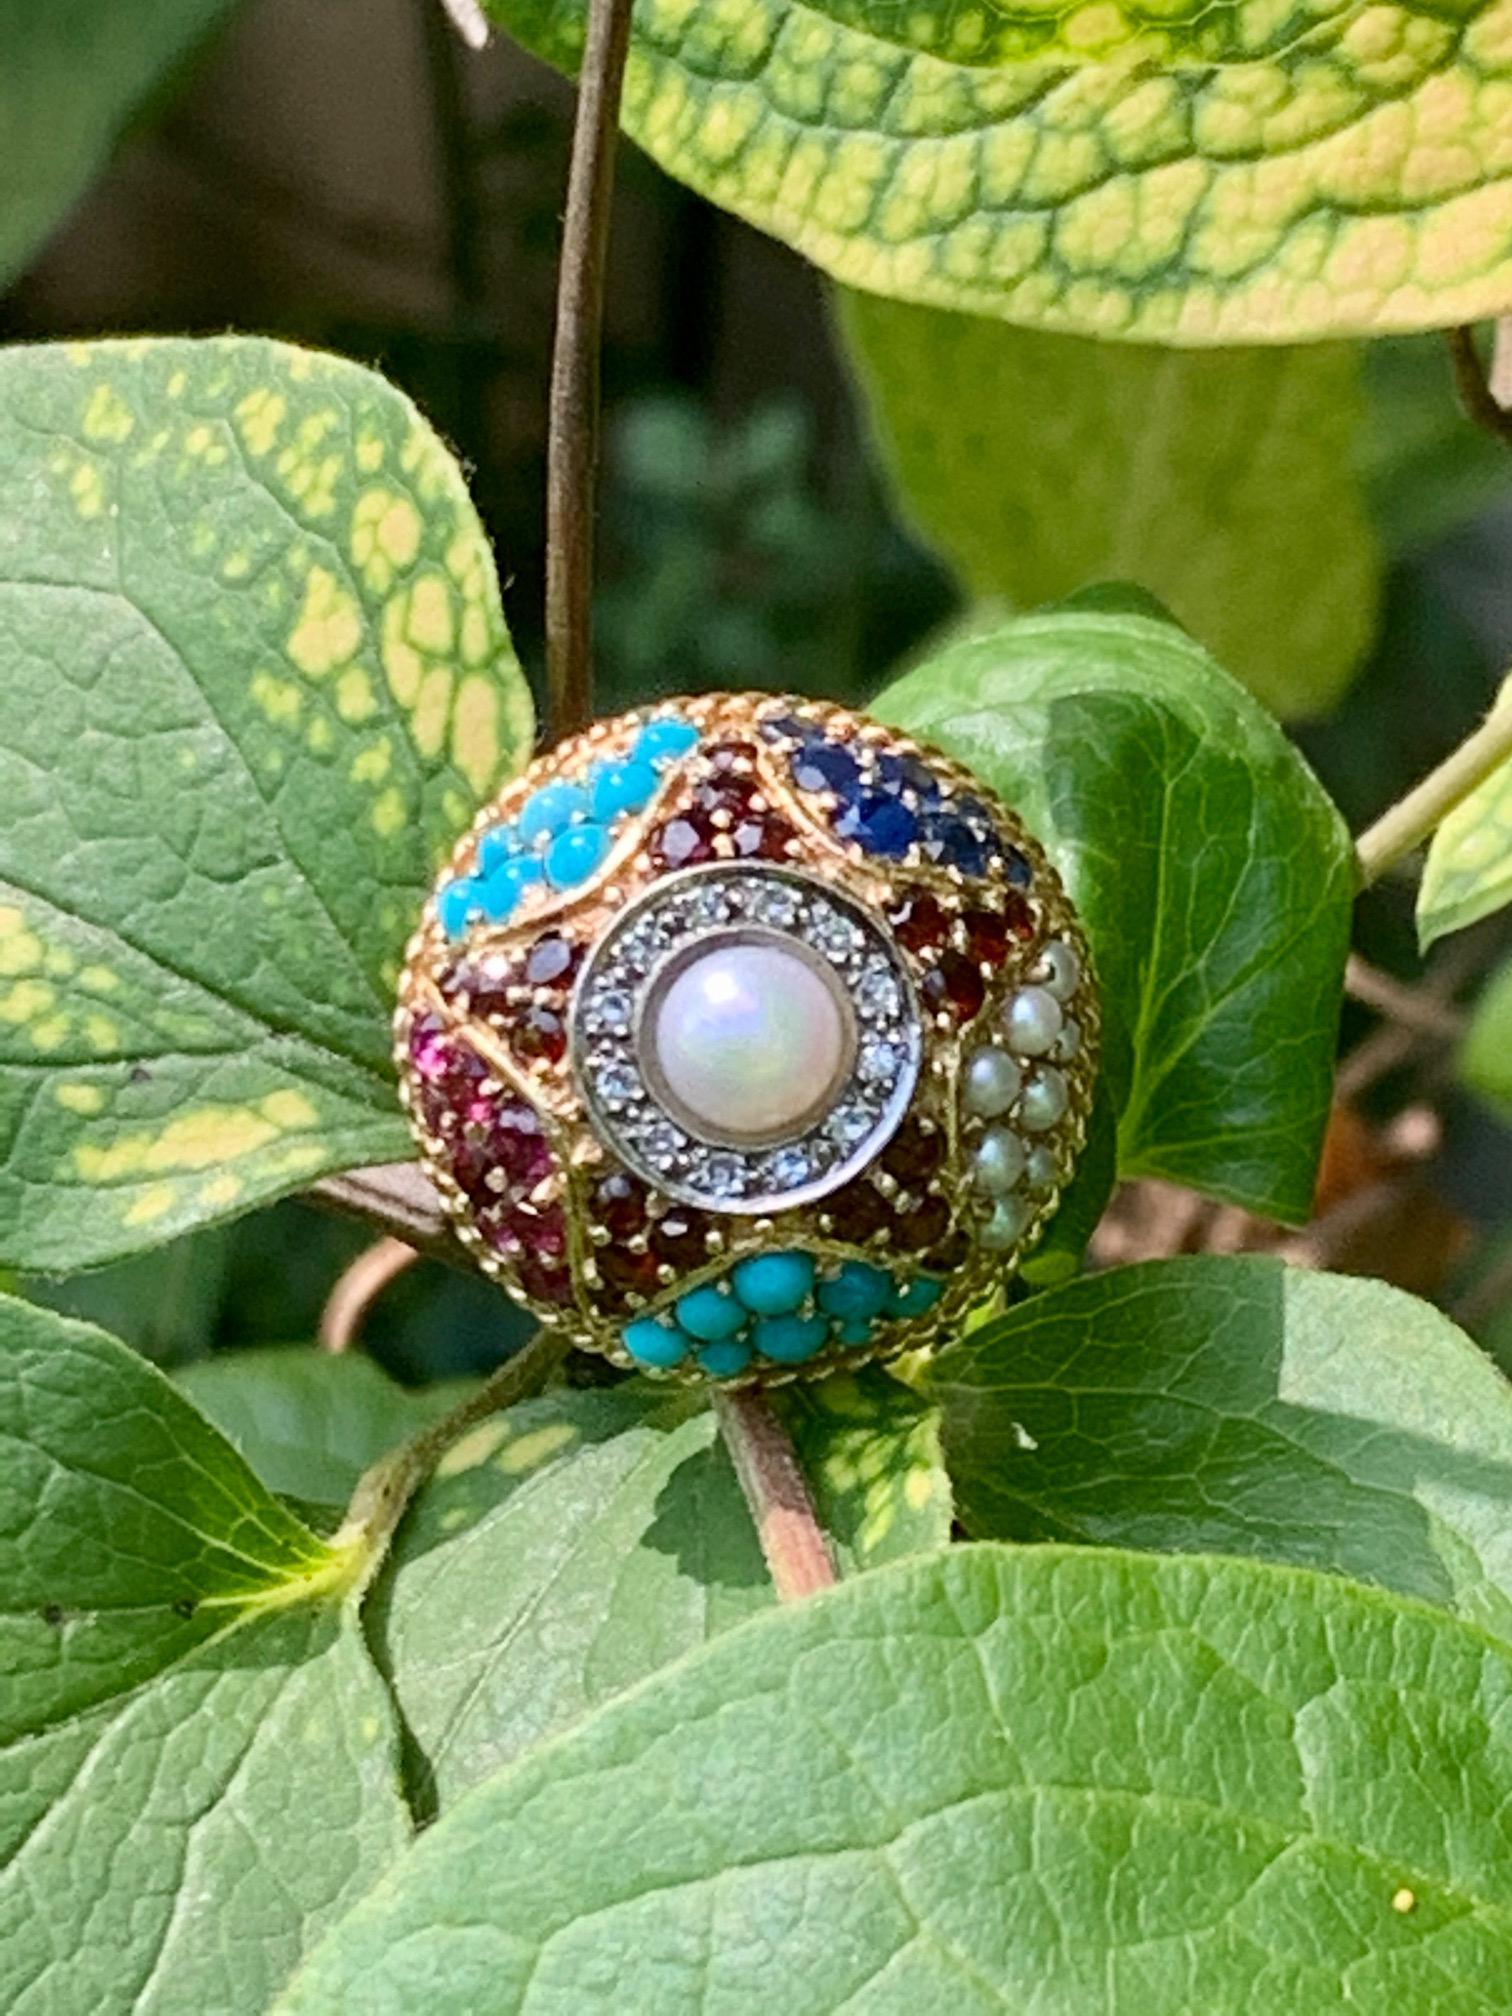 This phenomenal 14k yellow gold, vintage dome ring features multiple gemstones placed to form a star on the top of the ring.

This ring is from the 1960's. 

It is stamped 14k.

The ring features:
1 cultured Pearl = 6mm
20 Garnets = 2mm each
16